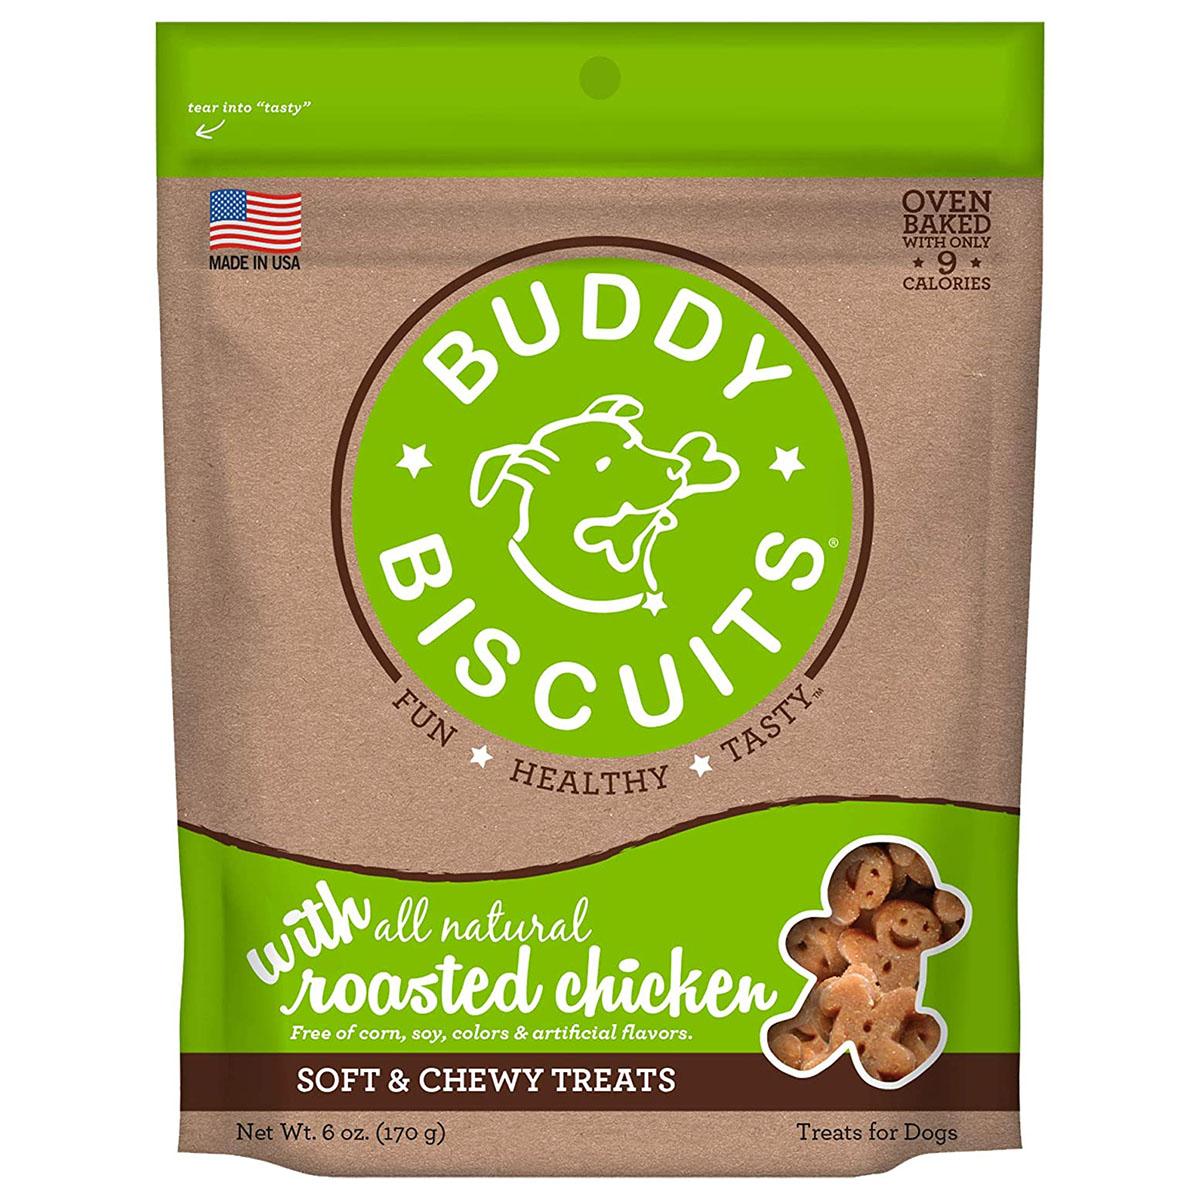 Buddy Biscuits Whole Grain Soft & Chewy Dog Treats - Roasted Chicken